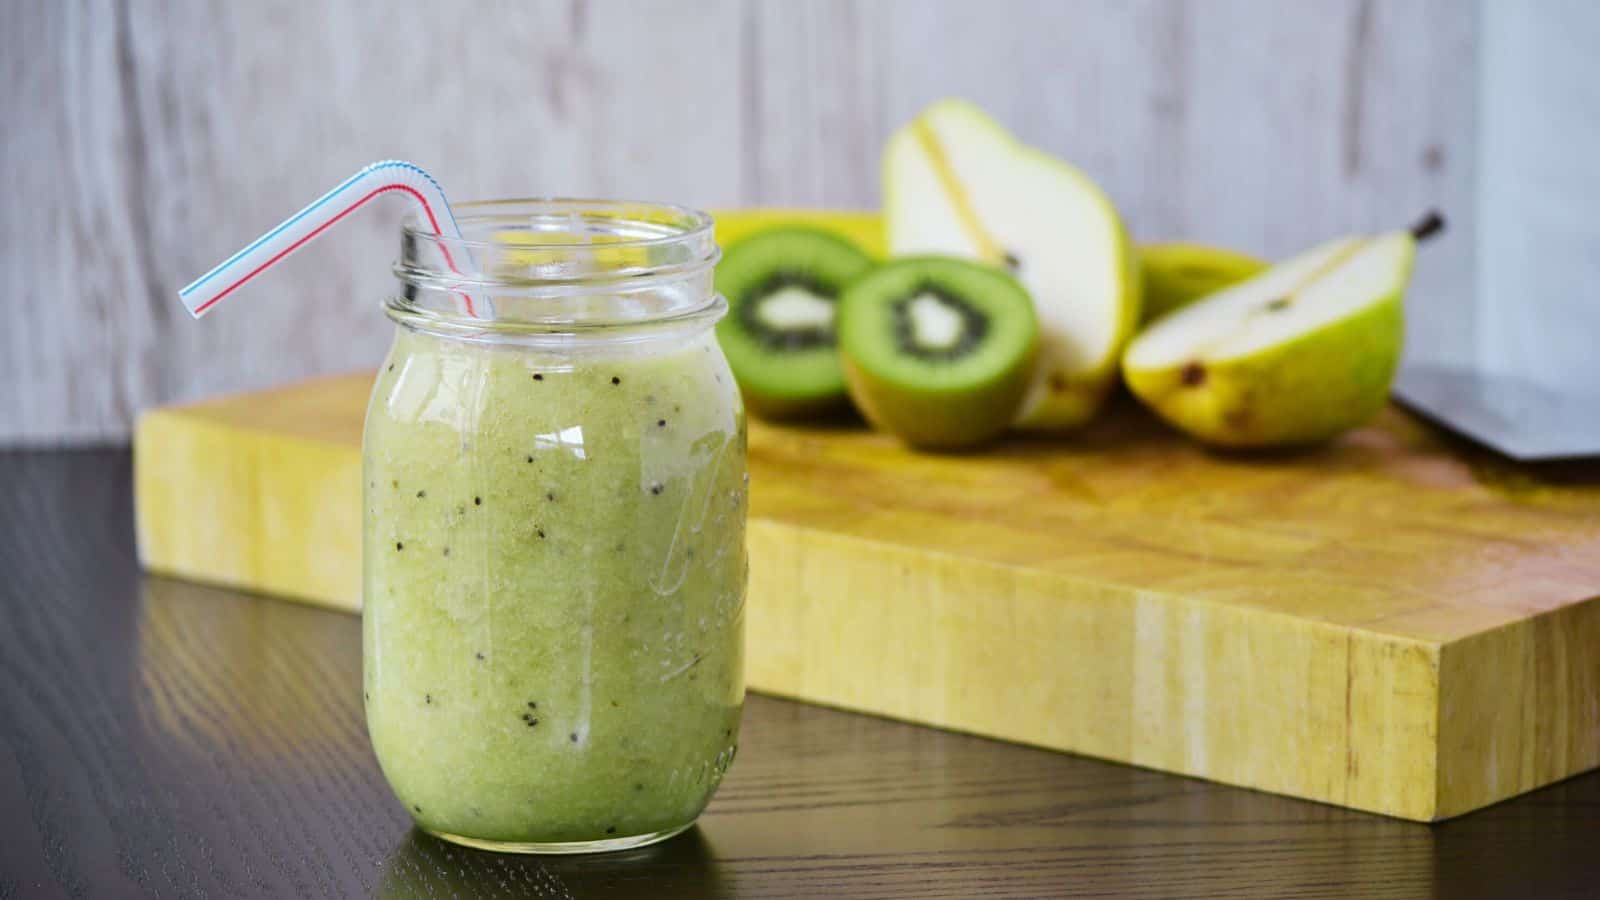 <p>This smoothie blends kiwi and pear for a fresh, fruity taste. It takes just 5 minutes to make and features green apples and spinach for added nutrition. The result is a refreshing drink perfect for summer. Try it to cool down and get a healthy boost.<br><strong>Get the Recipe: </strong><a href="https://reneenicoleskitchen.com/kiwi-pear-green-smoothie/?utm_source=msn&utm_medium=page&utm_campaign=16%20refreshing%20drink%20recipes%20to%20help%20you%20cool%20off%20this%20summer">Kiwi Pear Green Smoothie</a></p>